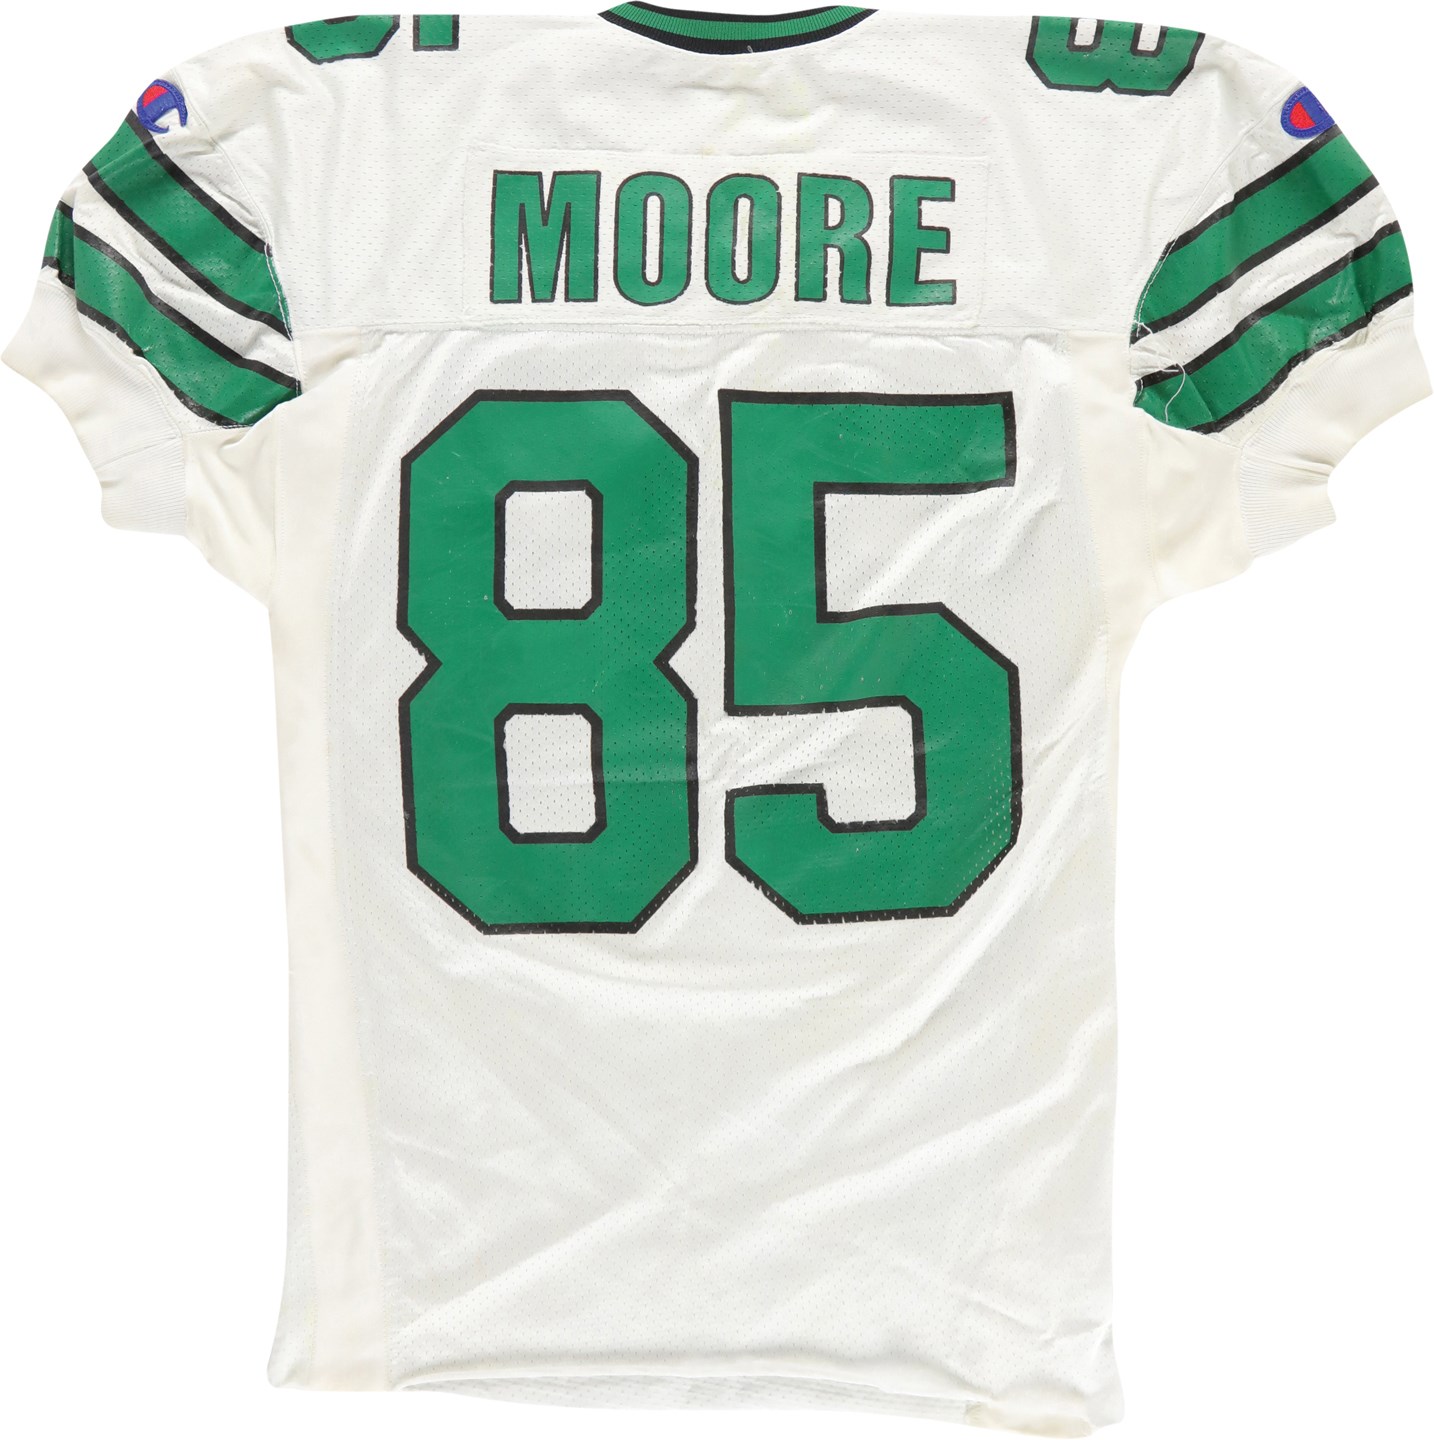 - 1994 Rob Moore New York Jets "Touchdown" Game Worn Jersey (Photo-Matched)